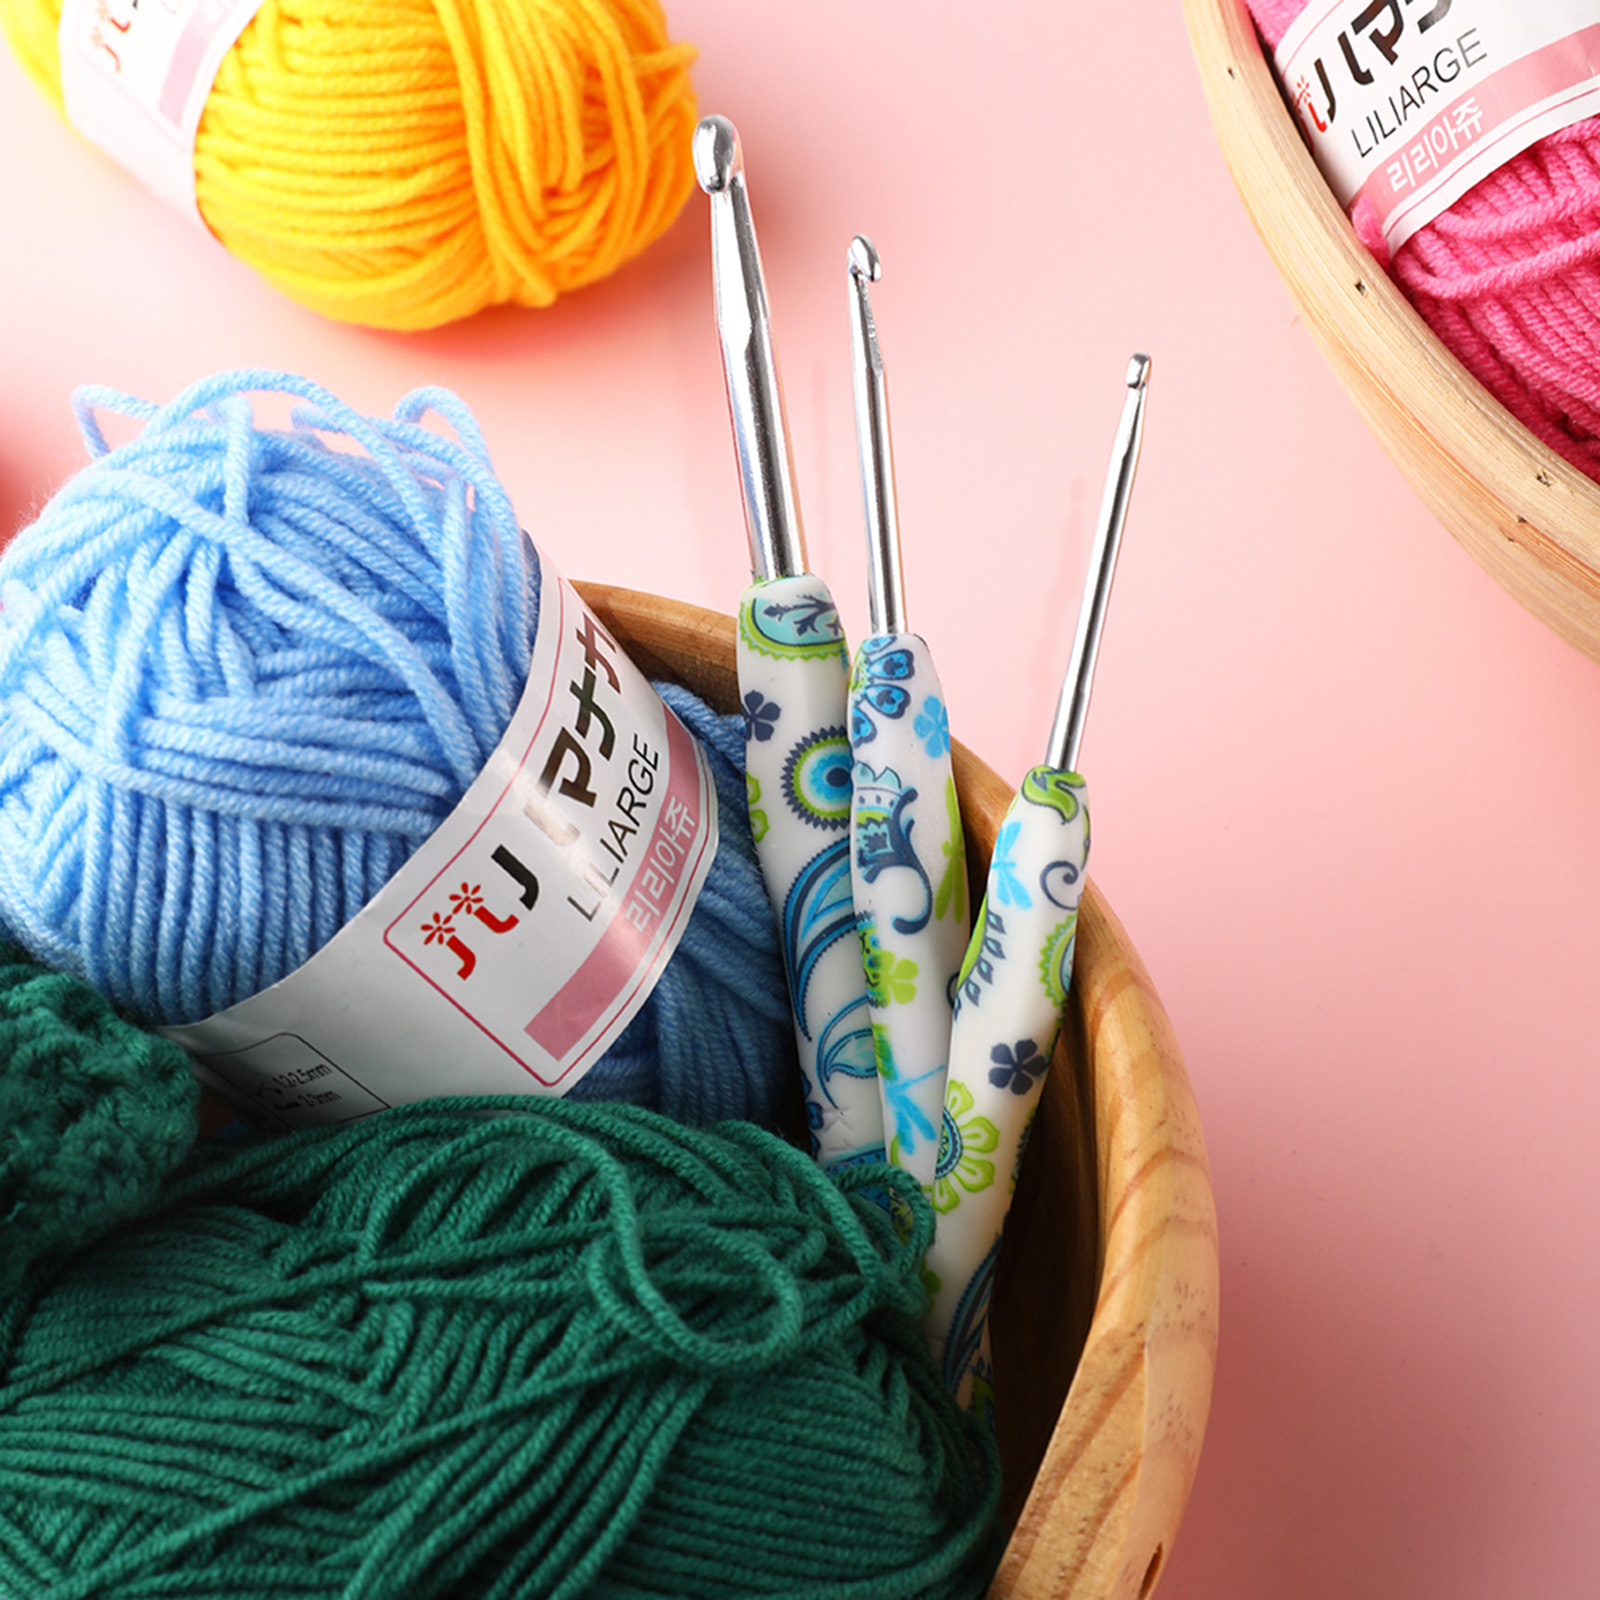 From Yarn to Art: The Creative Process of Crocheting